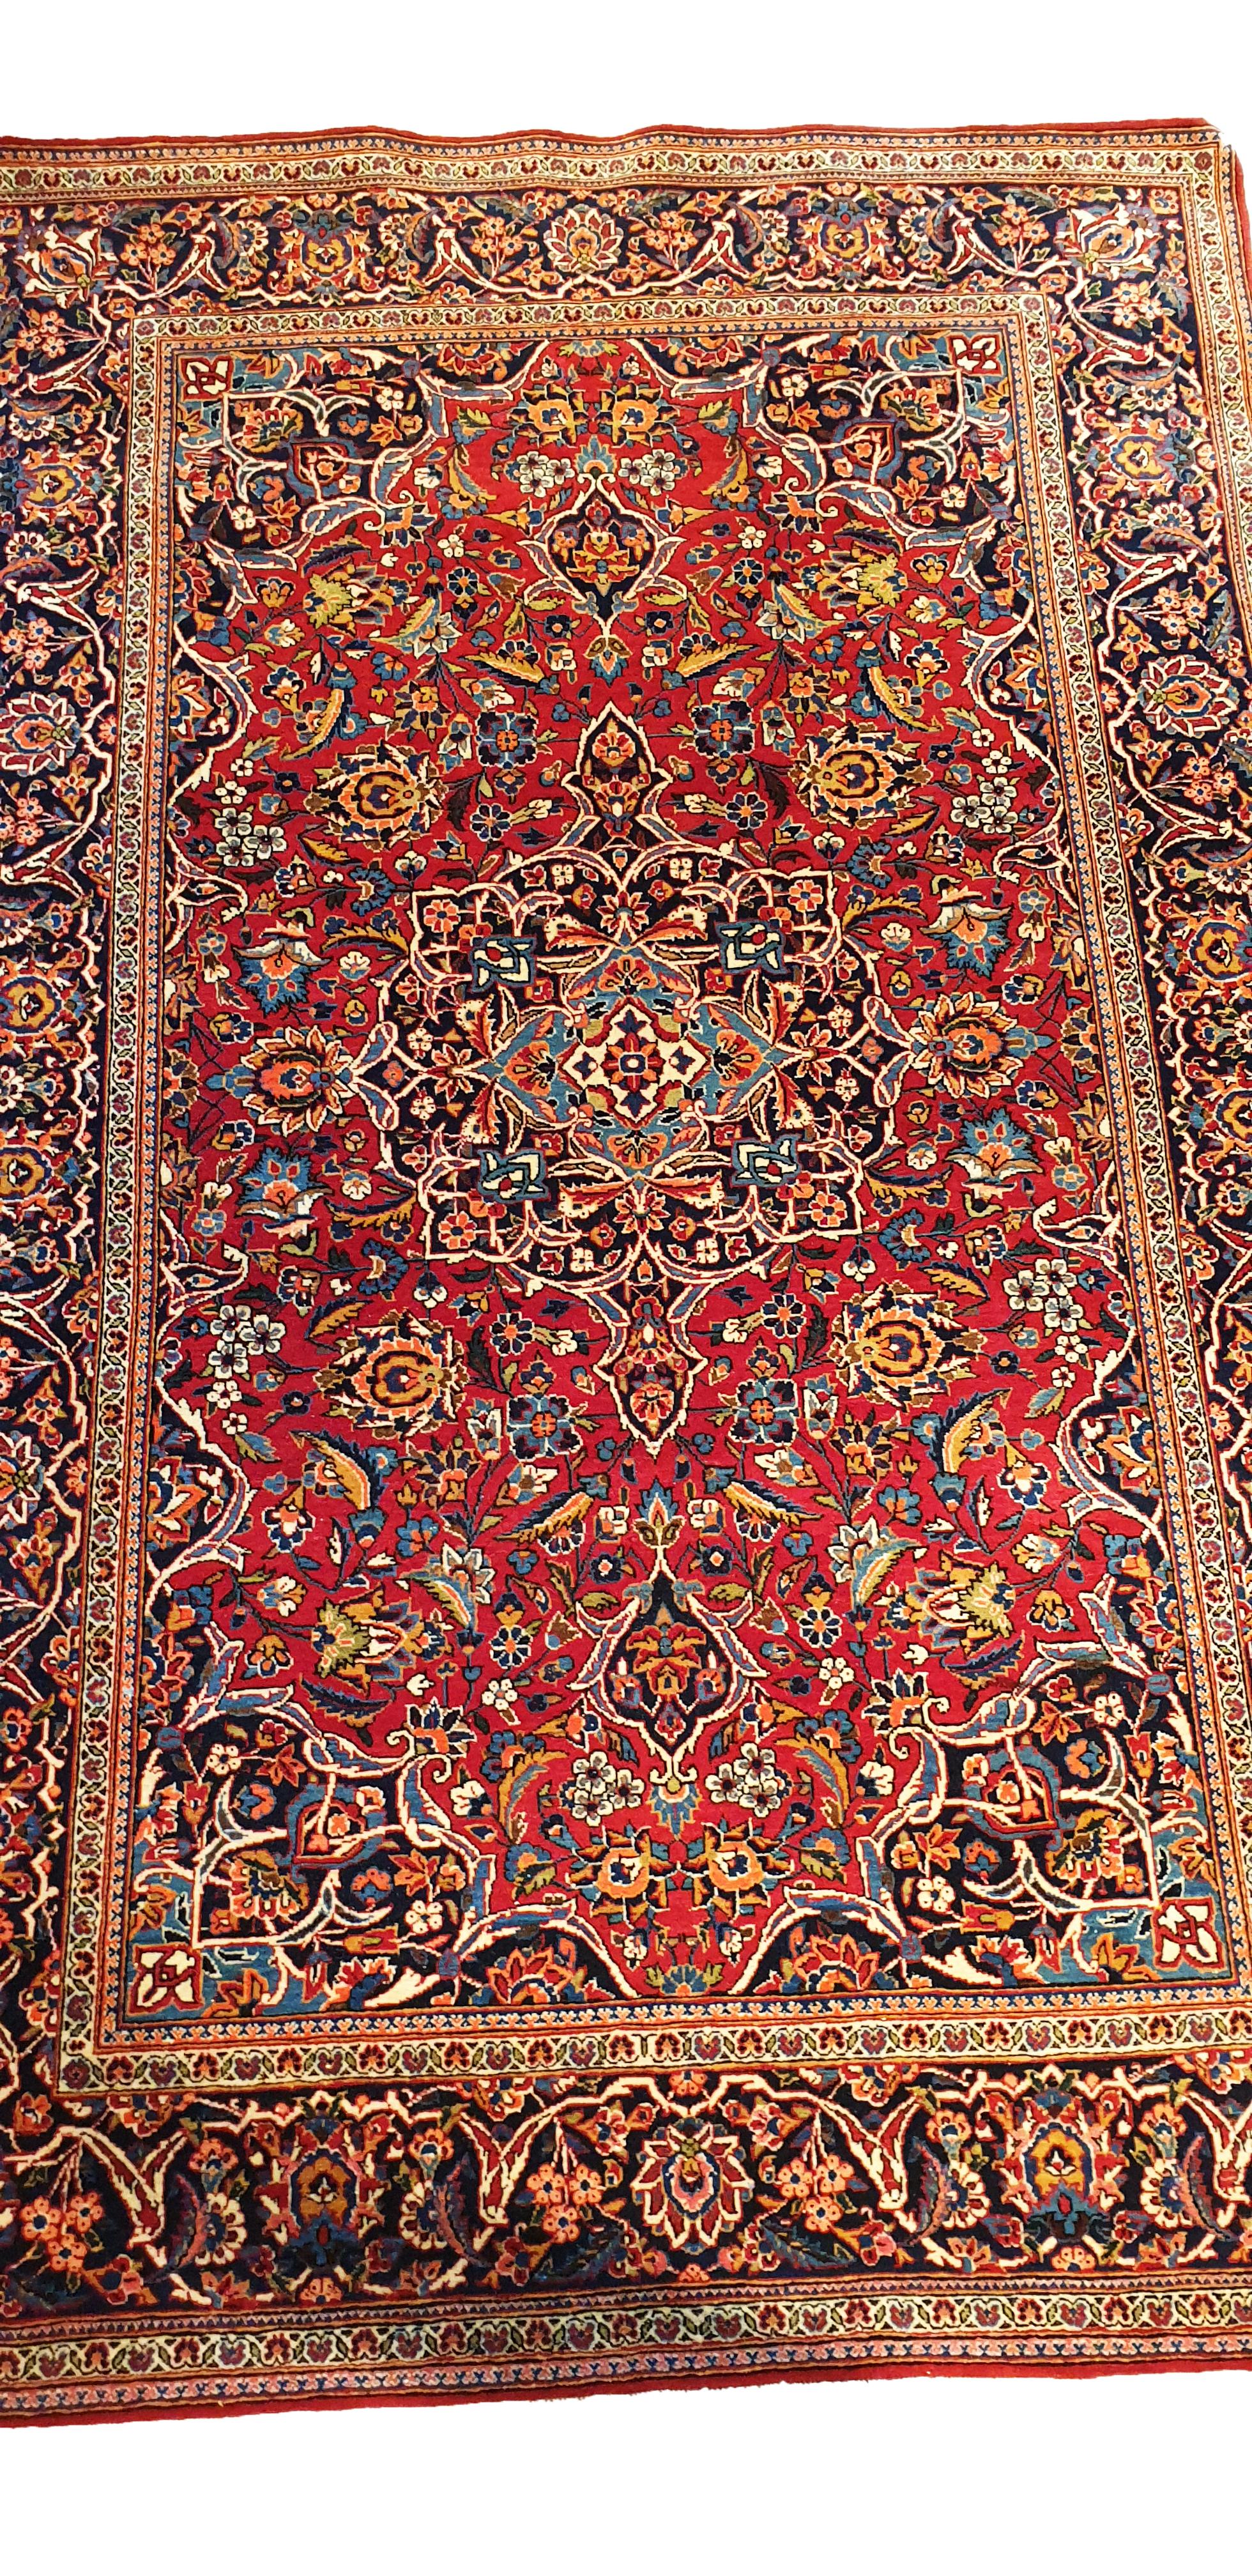 N° 731 - Hand knotted Oriental carpet from 20th century.
High quality, beautiful graphics and remarkable finesse.
Perfect state of preservation.

Measures: 210 x 135 cm.